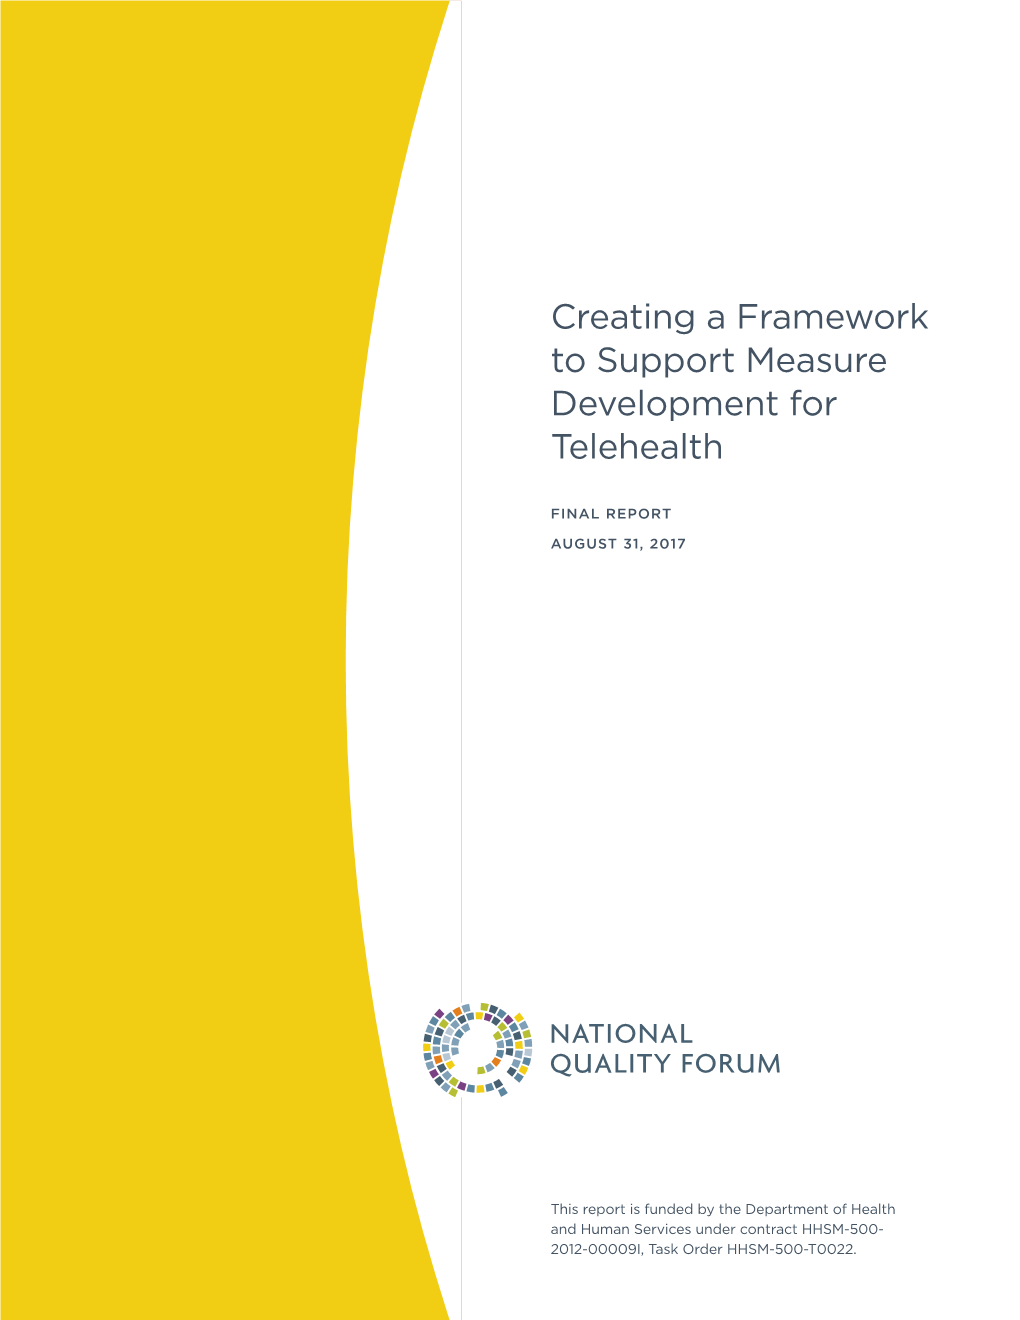 Creating a Framework to Support Measure Development for Telehealth